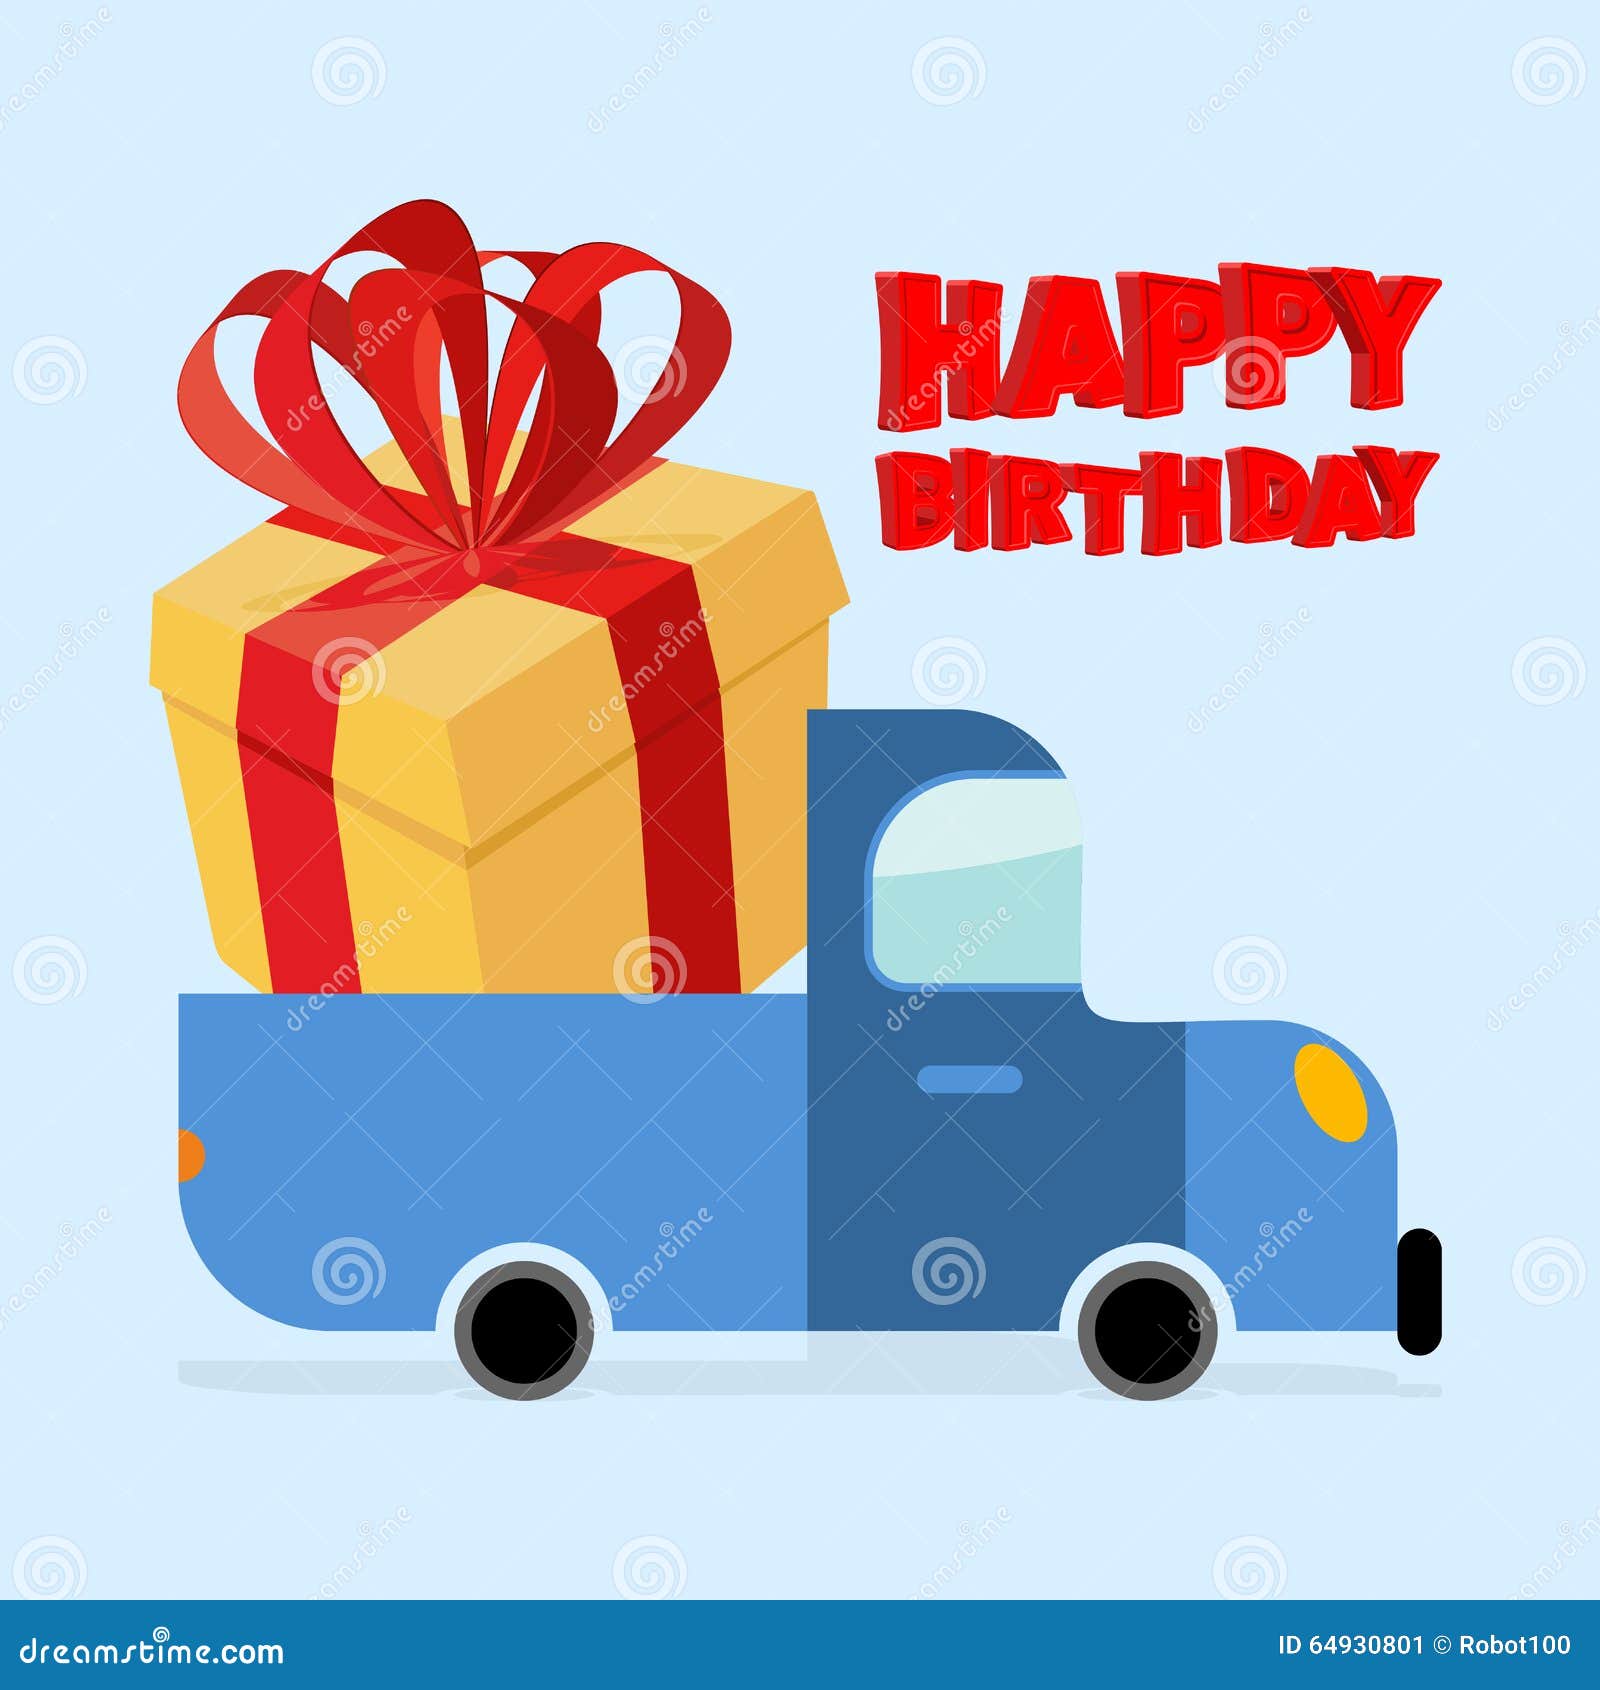 happy-birthday-truck-carries-large-gift-box-yellow-gift-box-wi-red-bow-big-surprise-car-64930801.jpg